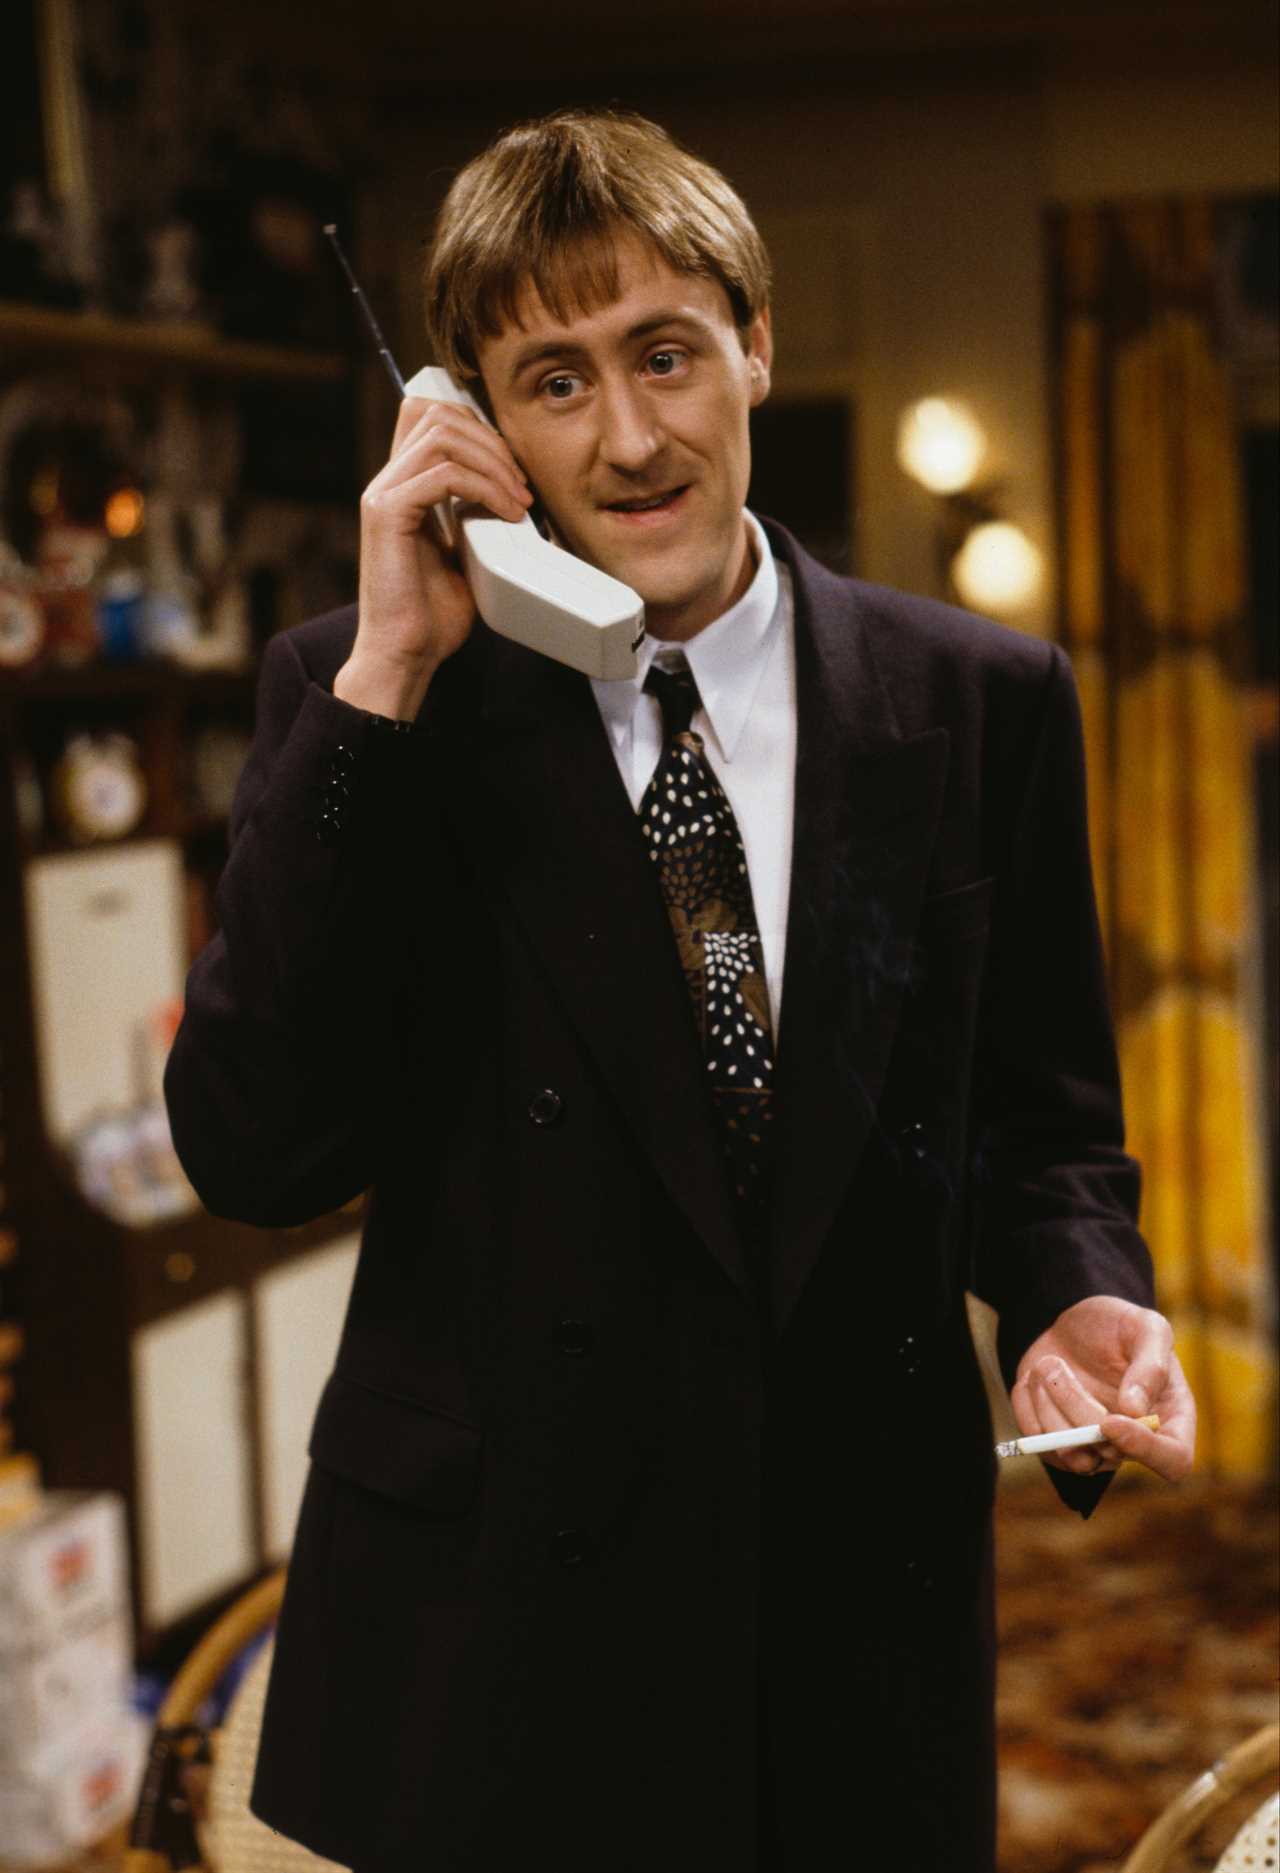 Only Fools and Horses Star Nicholas Lyndhurst Looks Unrecognizable in New Frasier Reboot